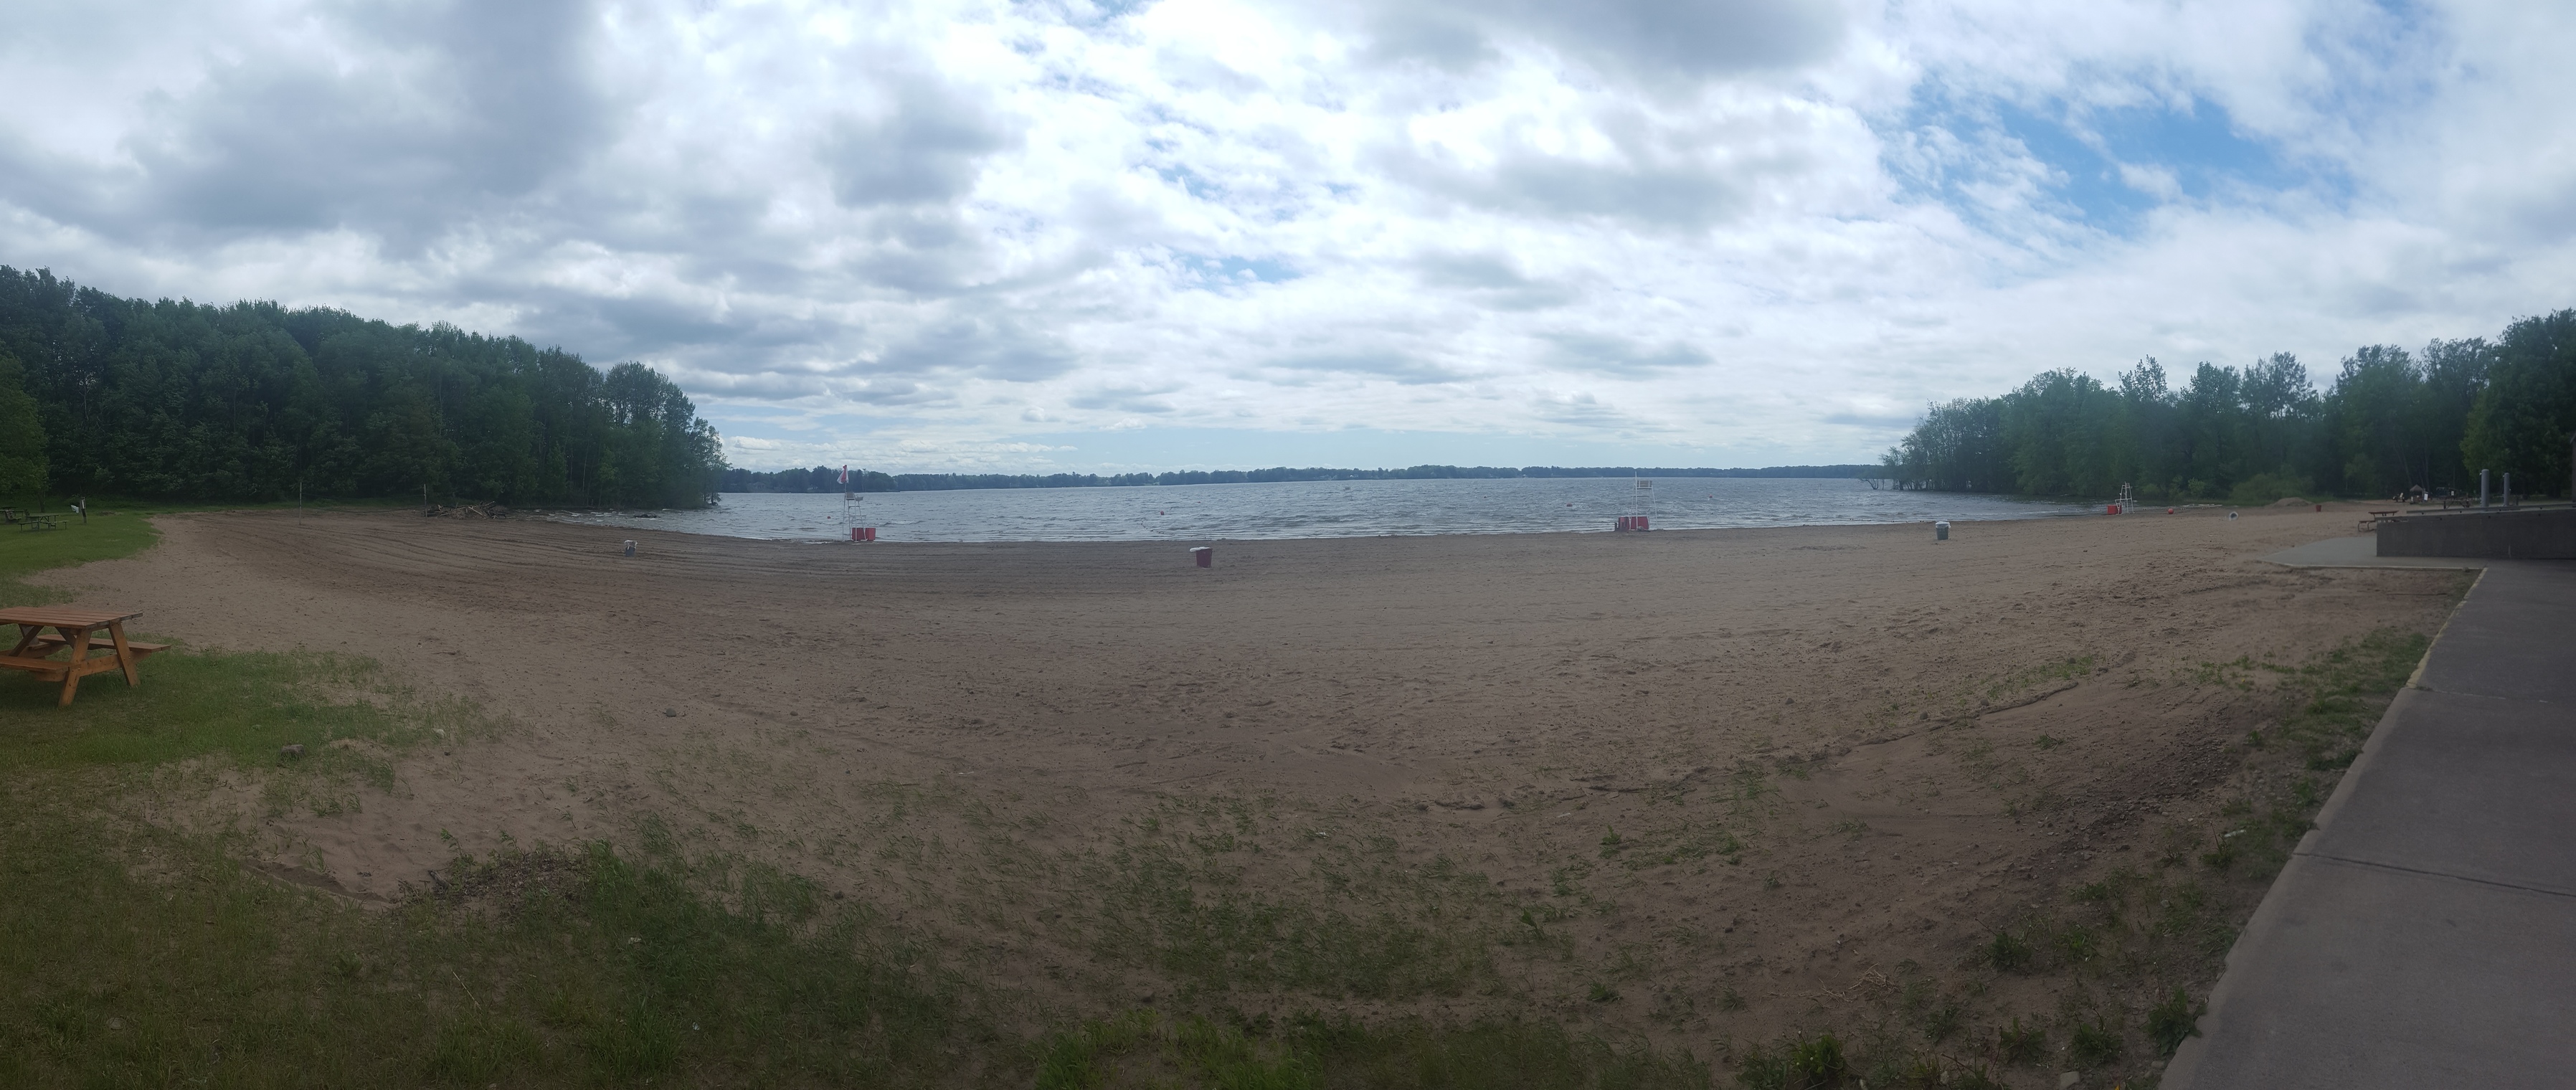 The beach at Delta Lake State Park